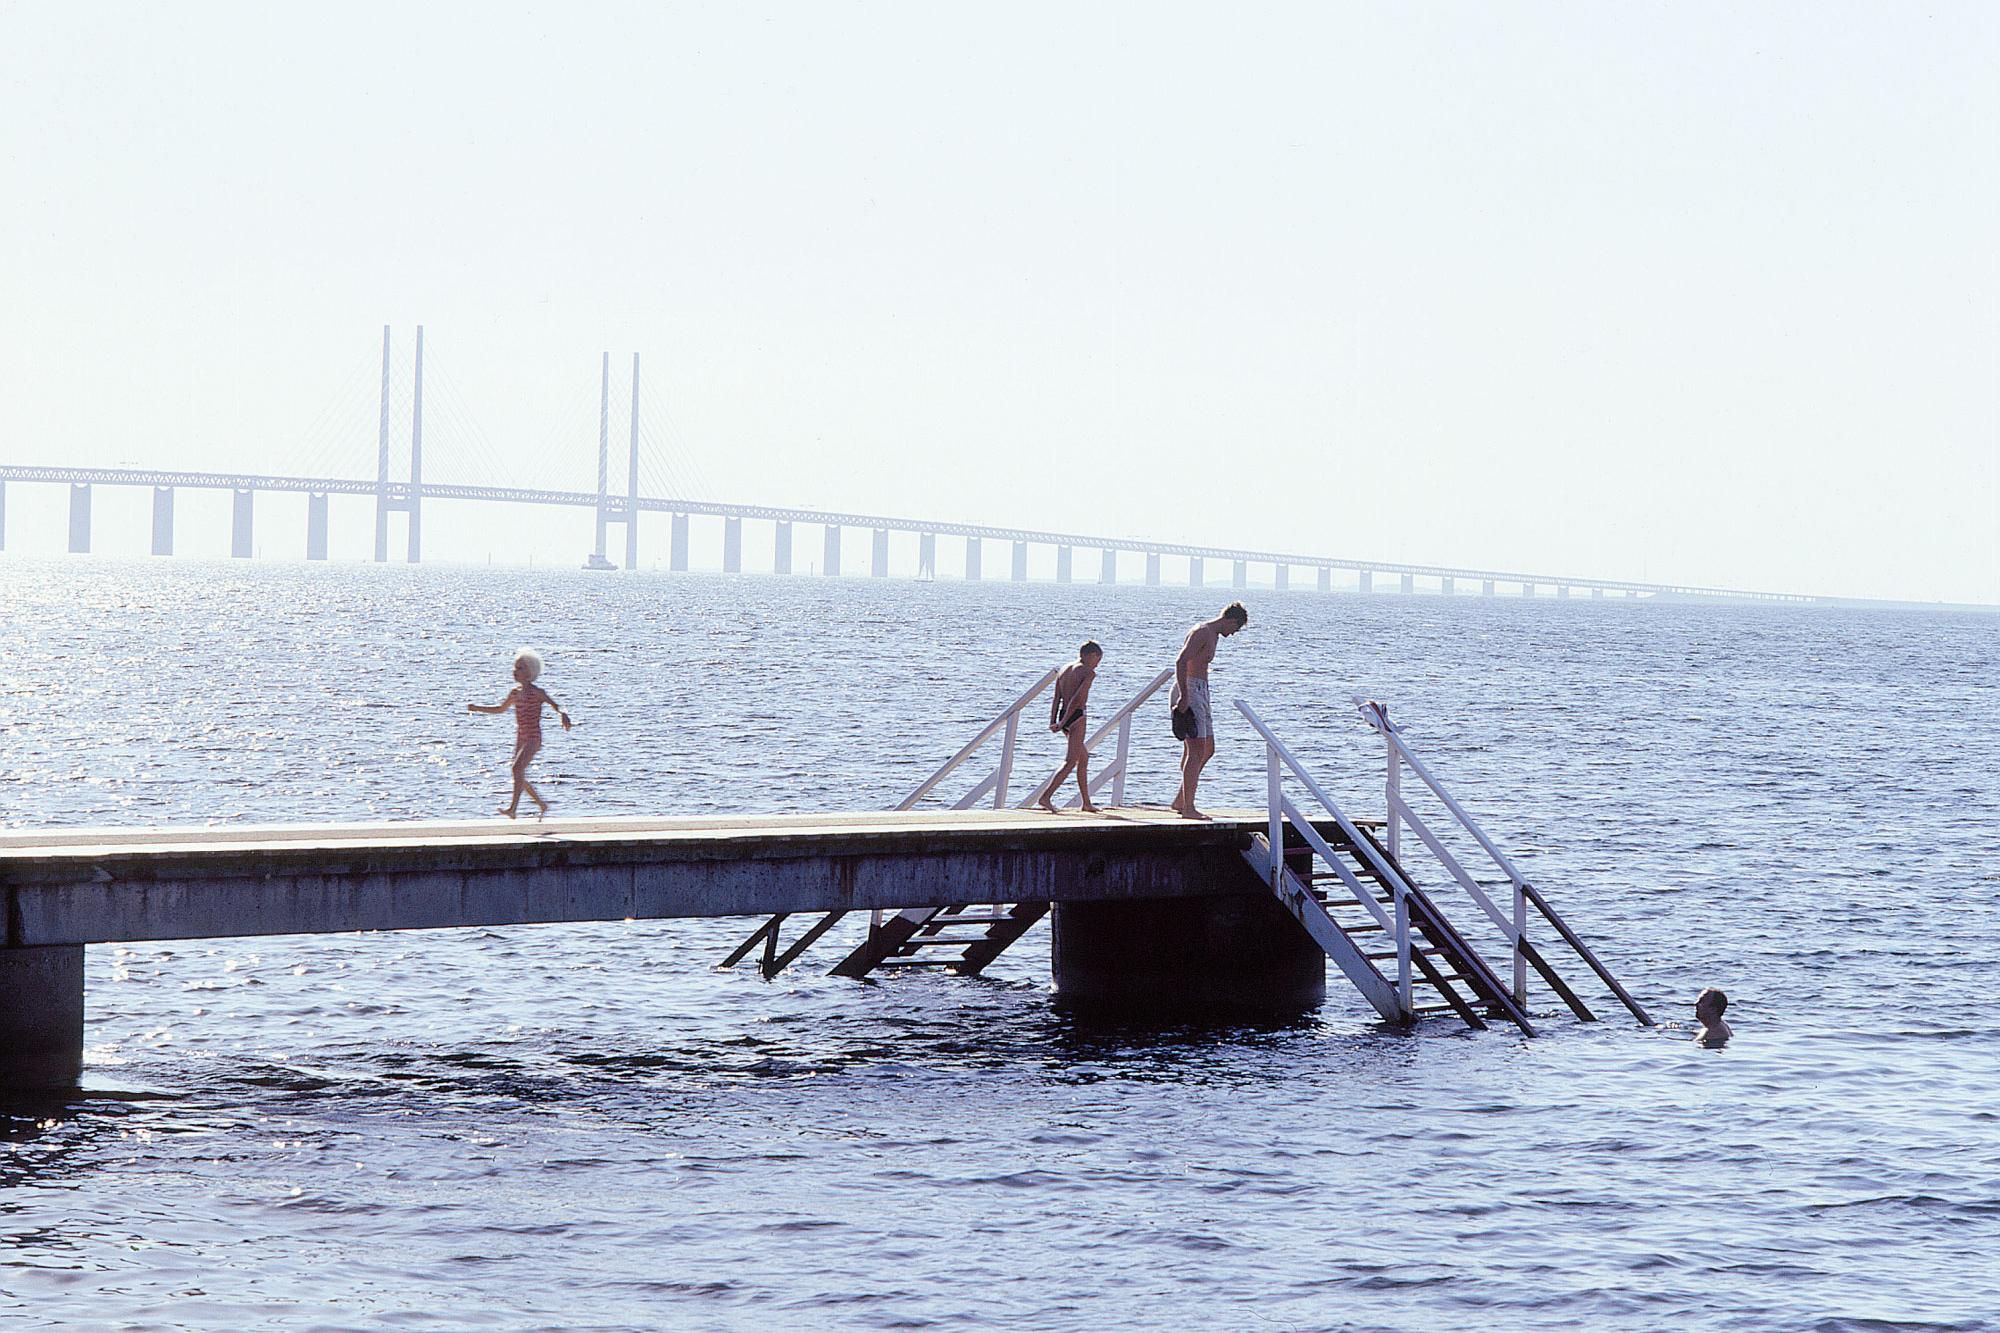 Jump in for a swim with the Oresundsbridge in the background